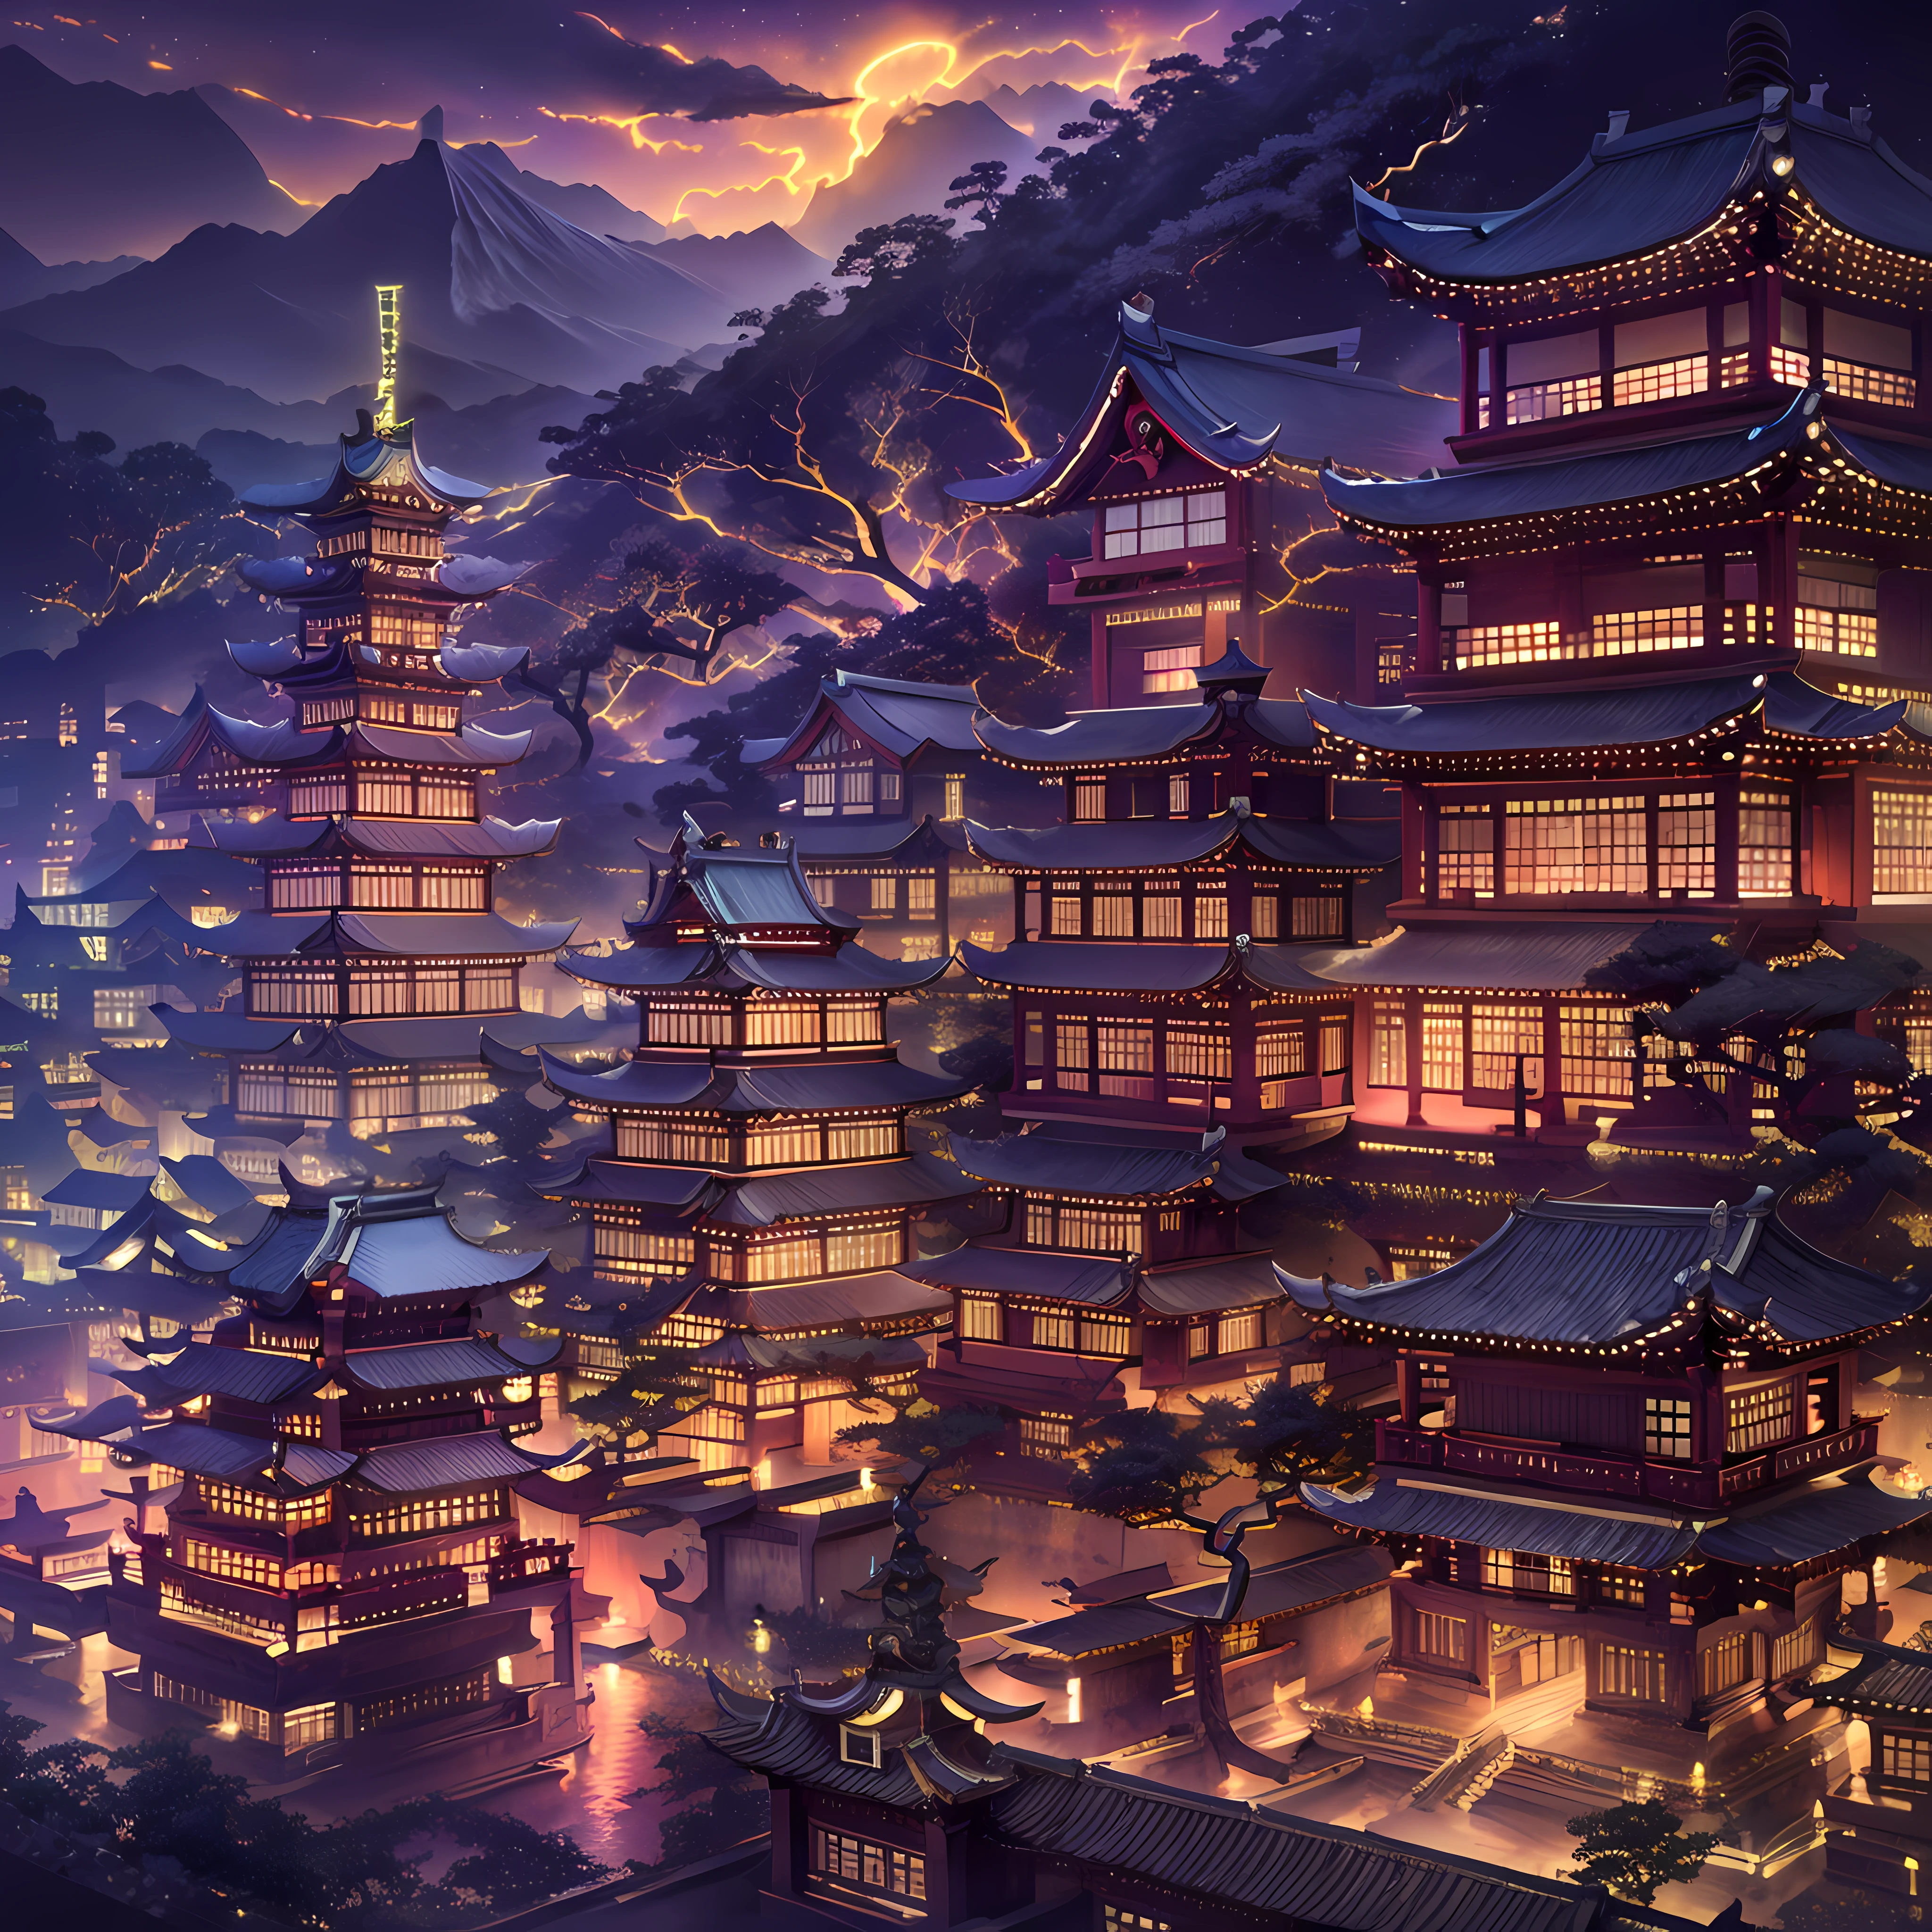 Asian architecture in the city Asian architecture in the city at night with boats passing by， dreamy Chinese towns， Chinese Ancient Architecture， Japan city， Colorful fox city， digital painting of a pagoda， Japanese cities at night， cyberpunk chinese ancient castle， Beautiful rendering of the Tang Dynasty， A Japanese town， kyoto inspired， Chinese architecture， amazing wallpapers， The pagoda on the hill passes by with the boat at night， dreamy Chinese towns， Chinese Ancient Architecture， Japan city， Colorful fox city， digital painting of a pagoda， Japanese cities at night， cyberpunk chinese ancient castle， Beautiful rendering of the Tang Dynasty， A Japanese town， kyoto inspired， Chinese architecture， amazing wallpapers， pagodas on hills